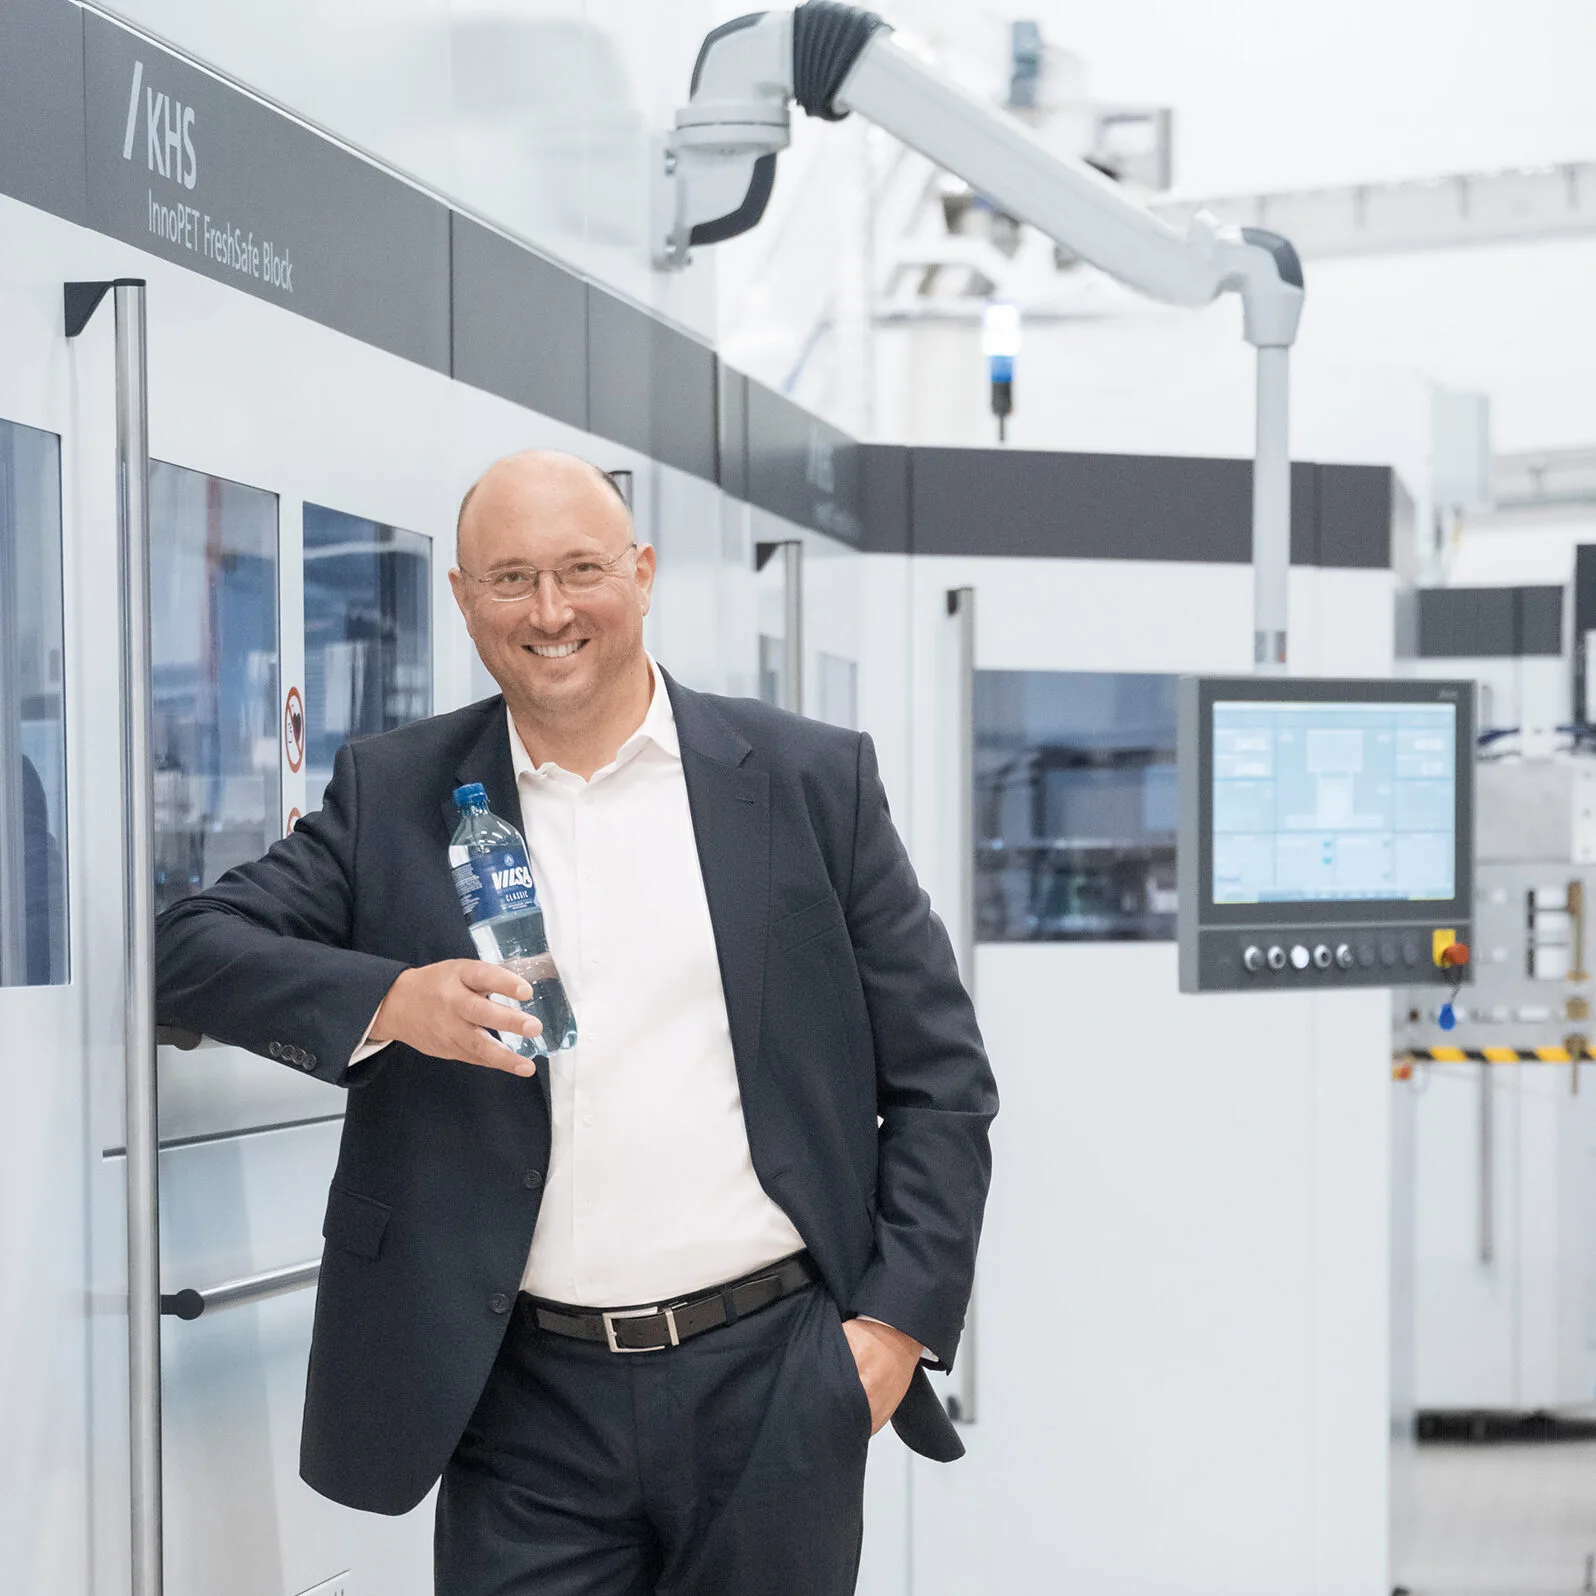 Mr. Rodekohr in a suit, leaning against a machine, holds a bottle of water in his hand